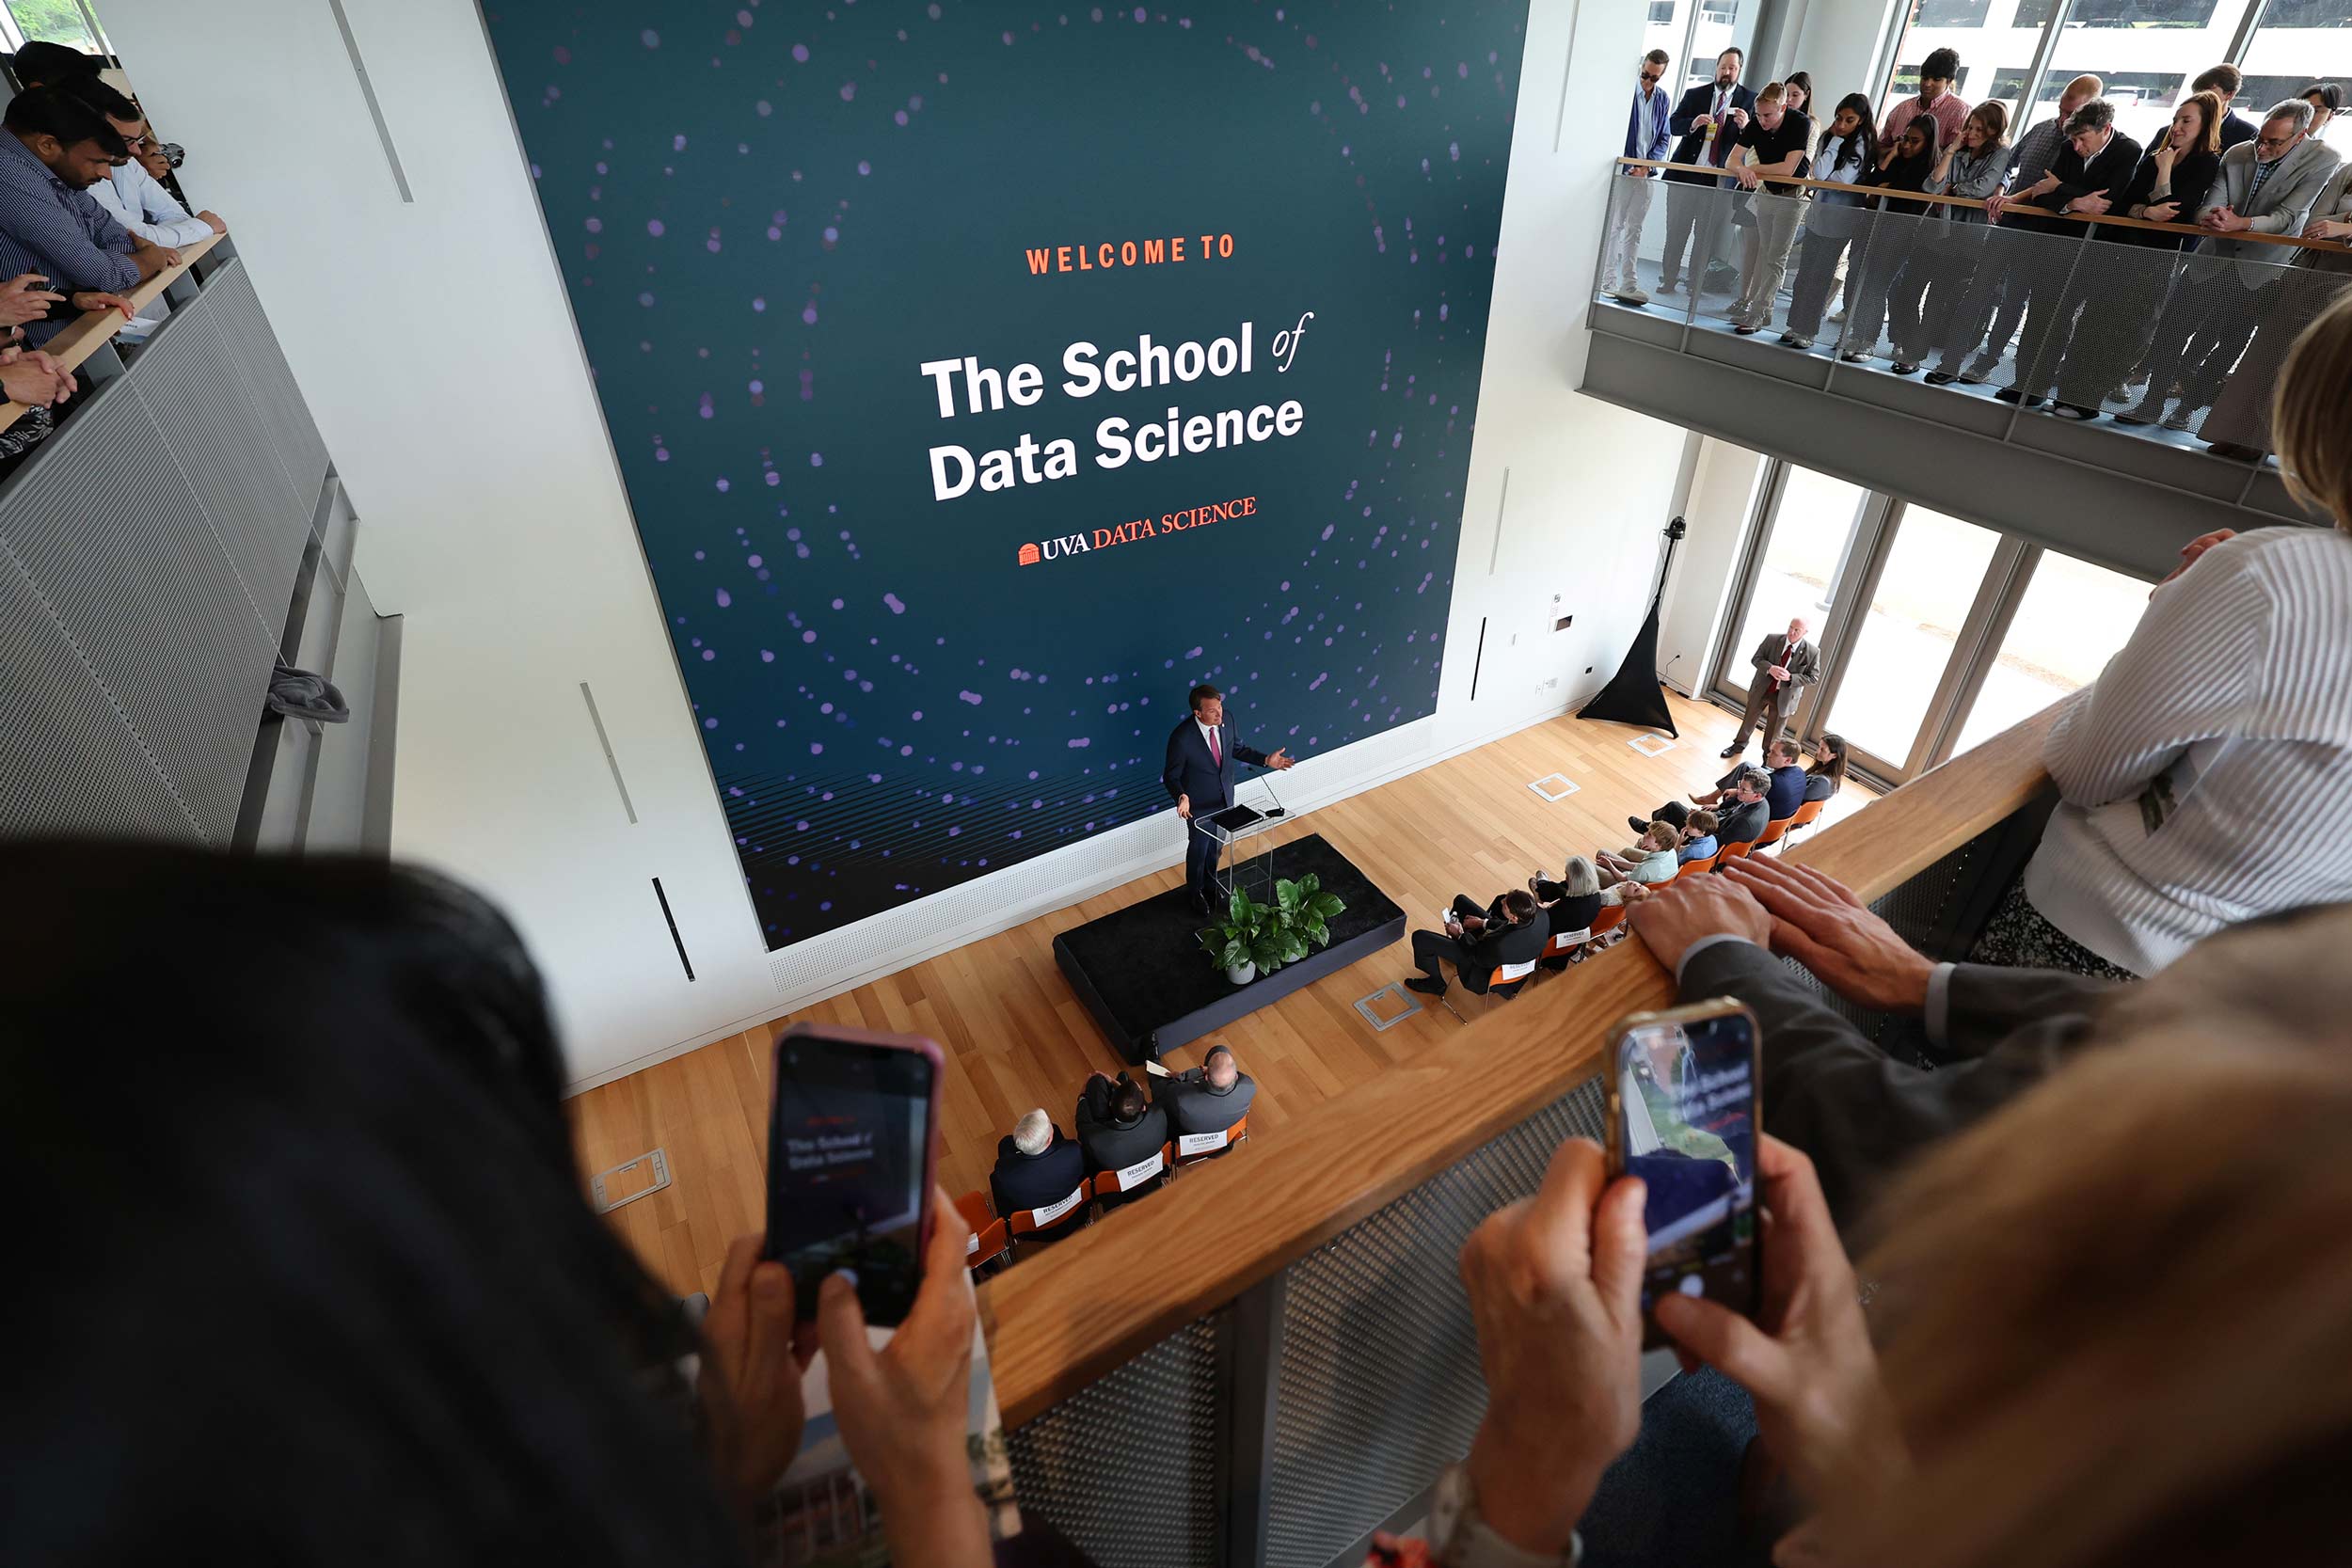 Governor of Virginia Partners with UVA Leadership to Inaugurate New Data Science Facility